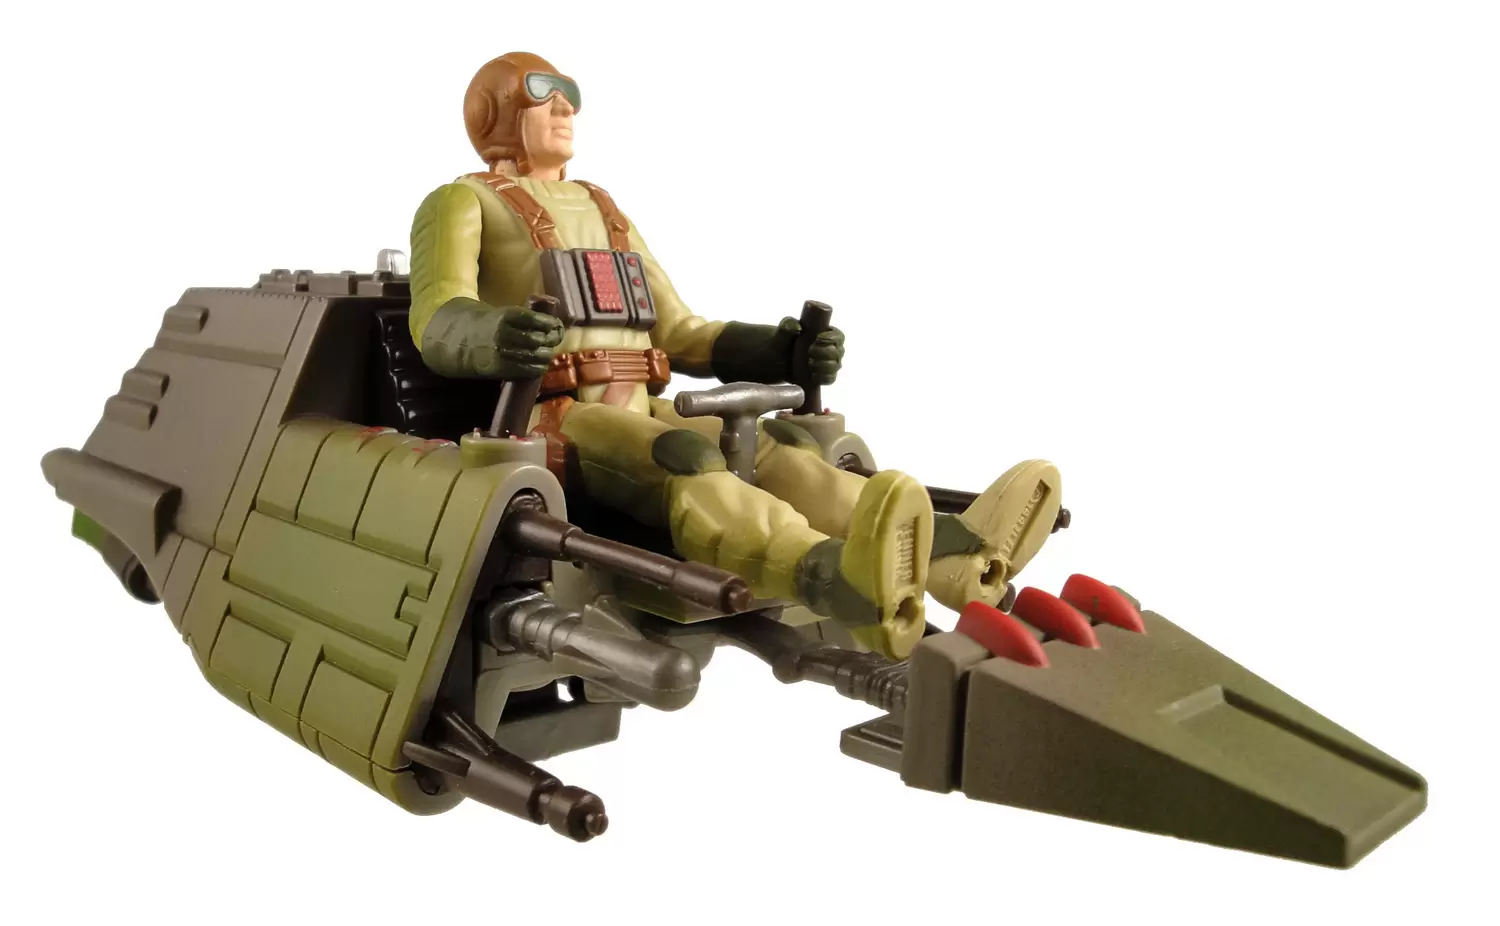 Power of the Force 2 - Speeder Bike (Expanded Universe)